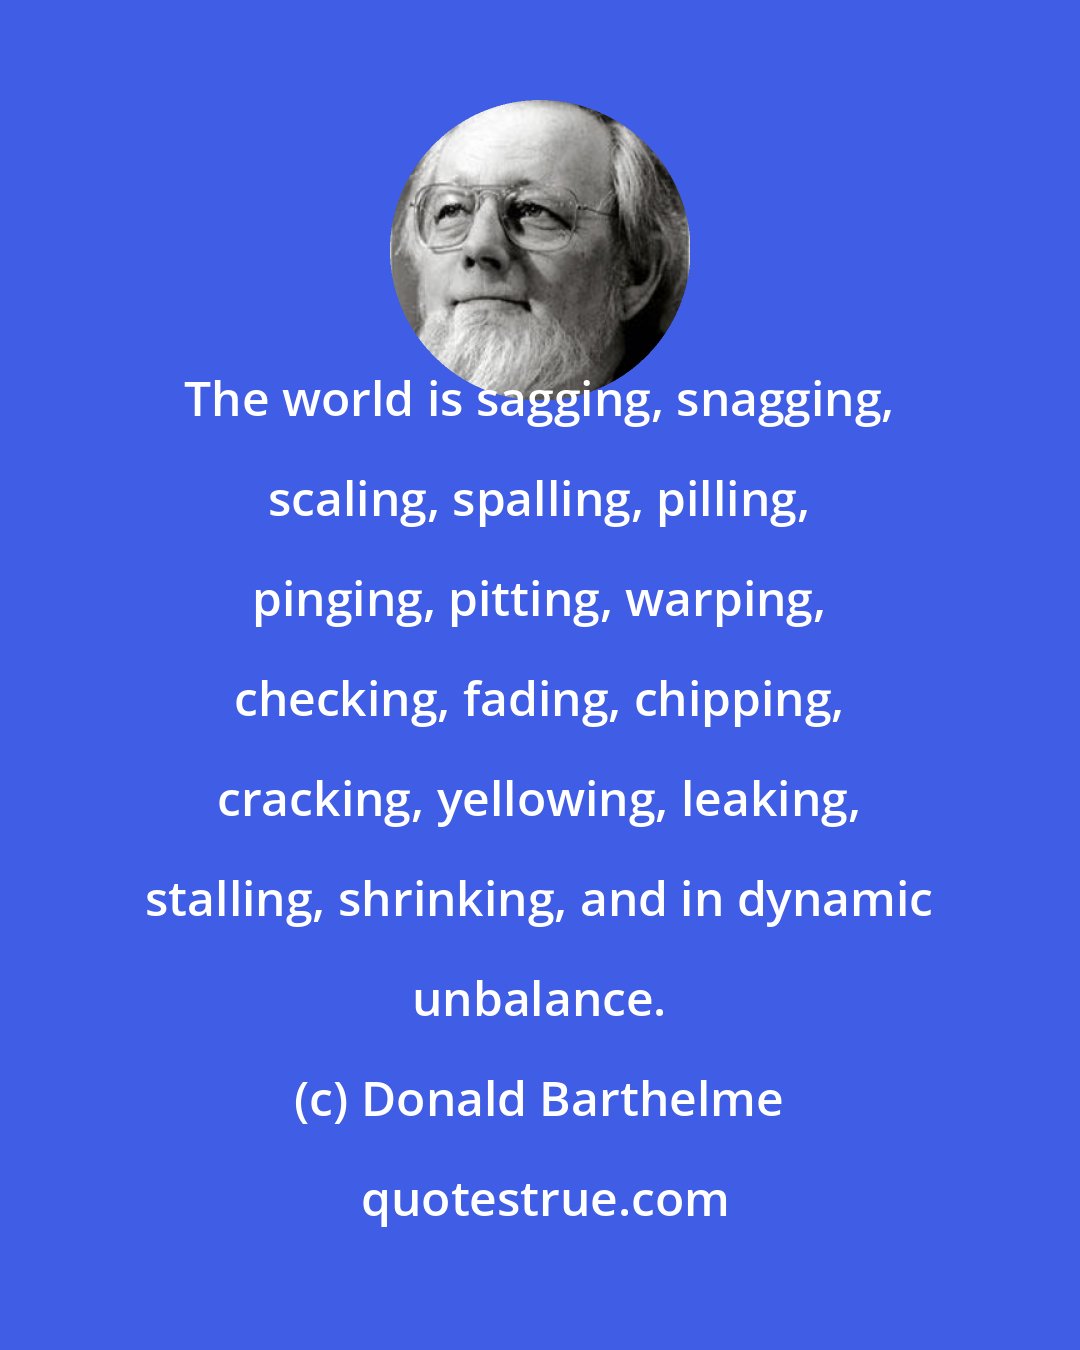 Donald Barthelme: The world is sagging, snagging, scaling, spalling, pilling, pinging, pitting, warping, checking, fading, chipping, cracking, yellowing, leaking, stalling, shrinking, and in dynamic unbalance.